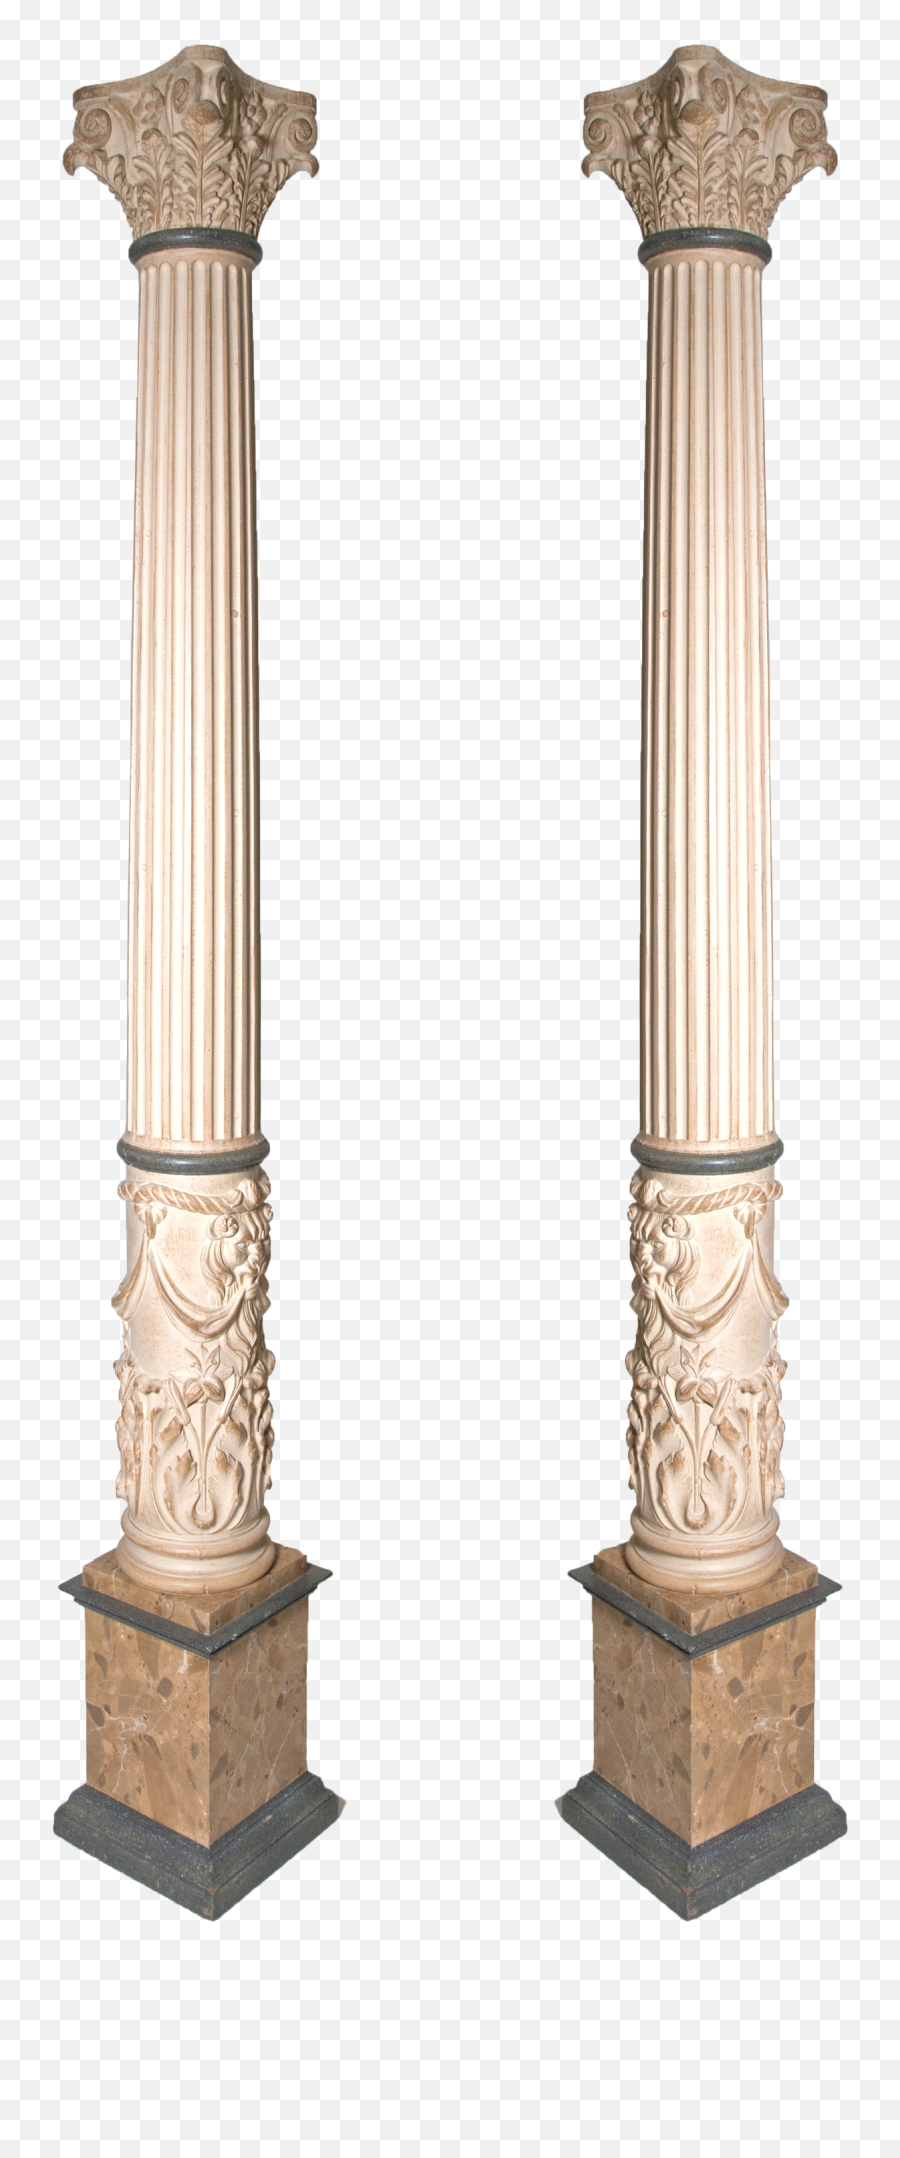 Wooden Pillar Png Picture - Architecture,Pillars Png